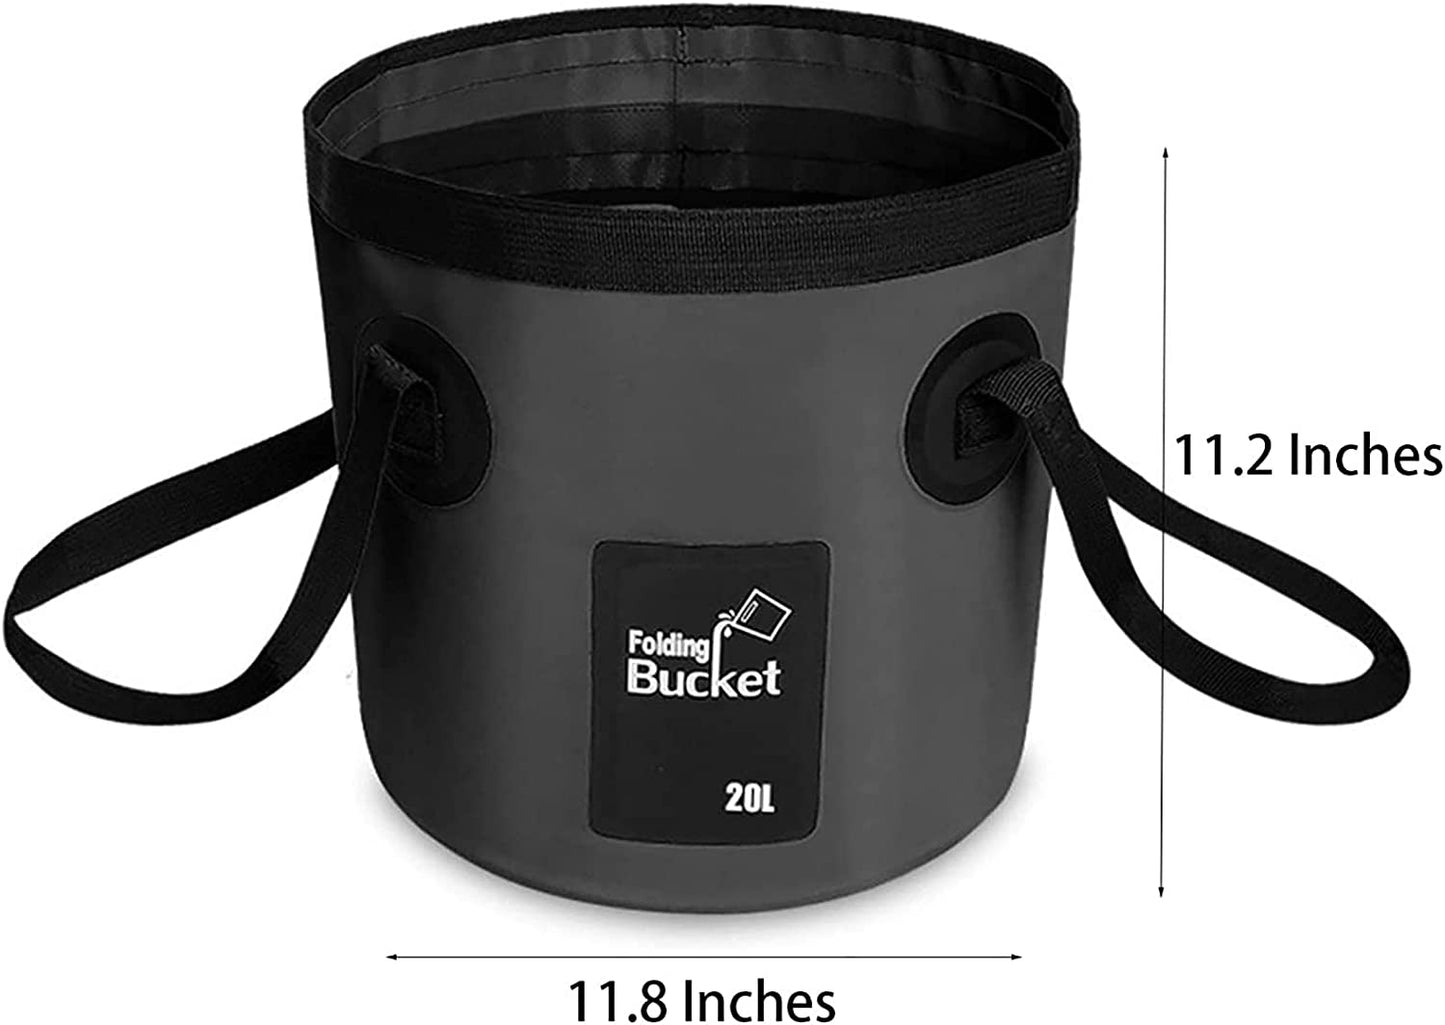 COLLAPSIBLE FOLDING WATER BUCKET